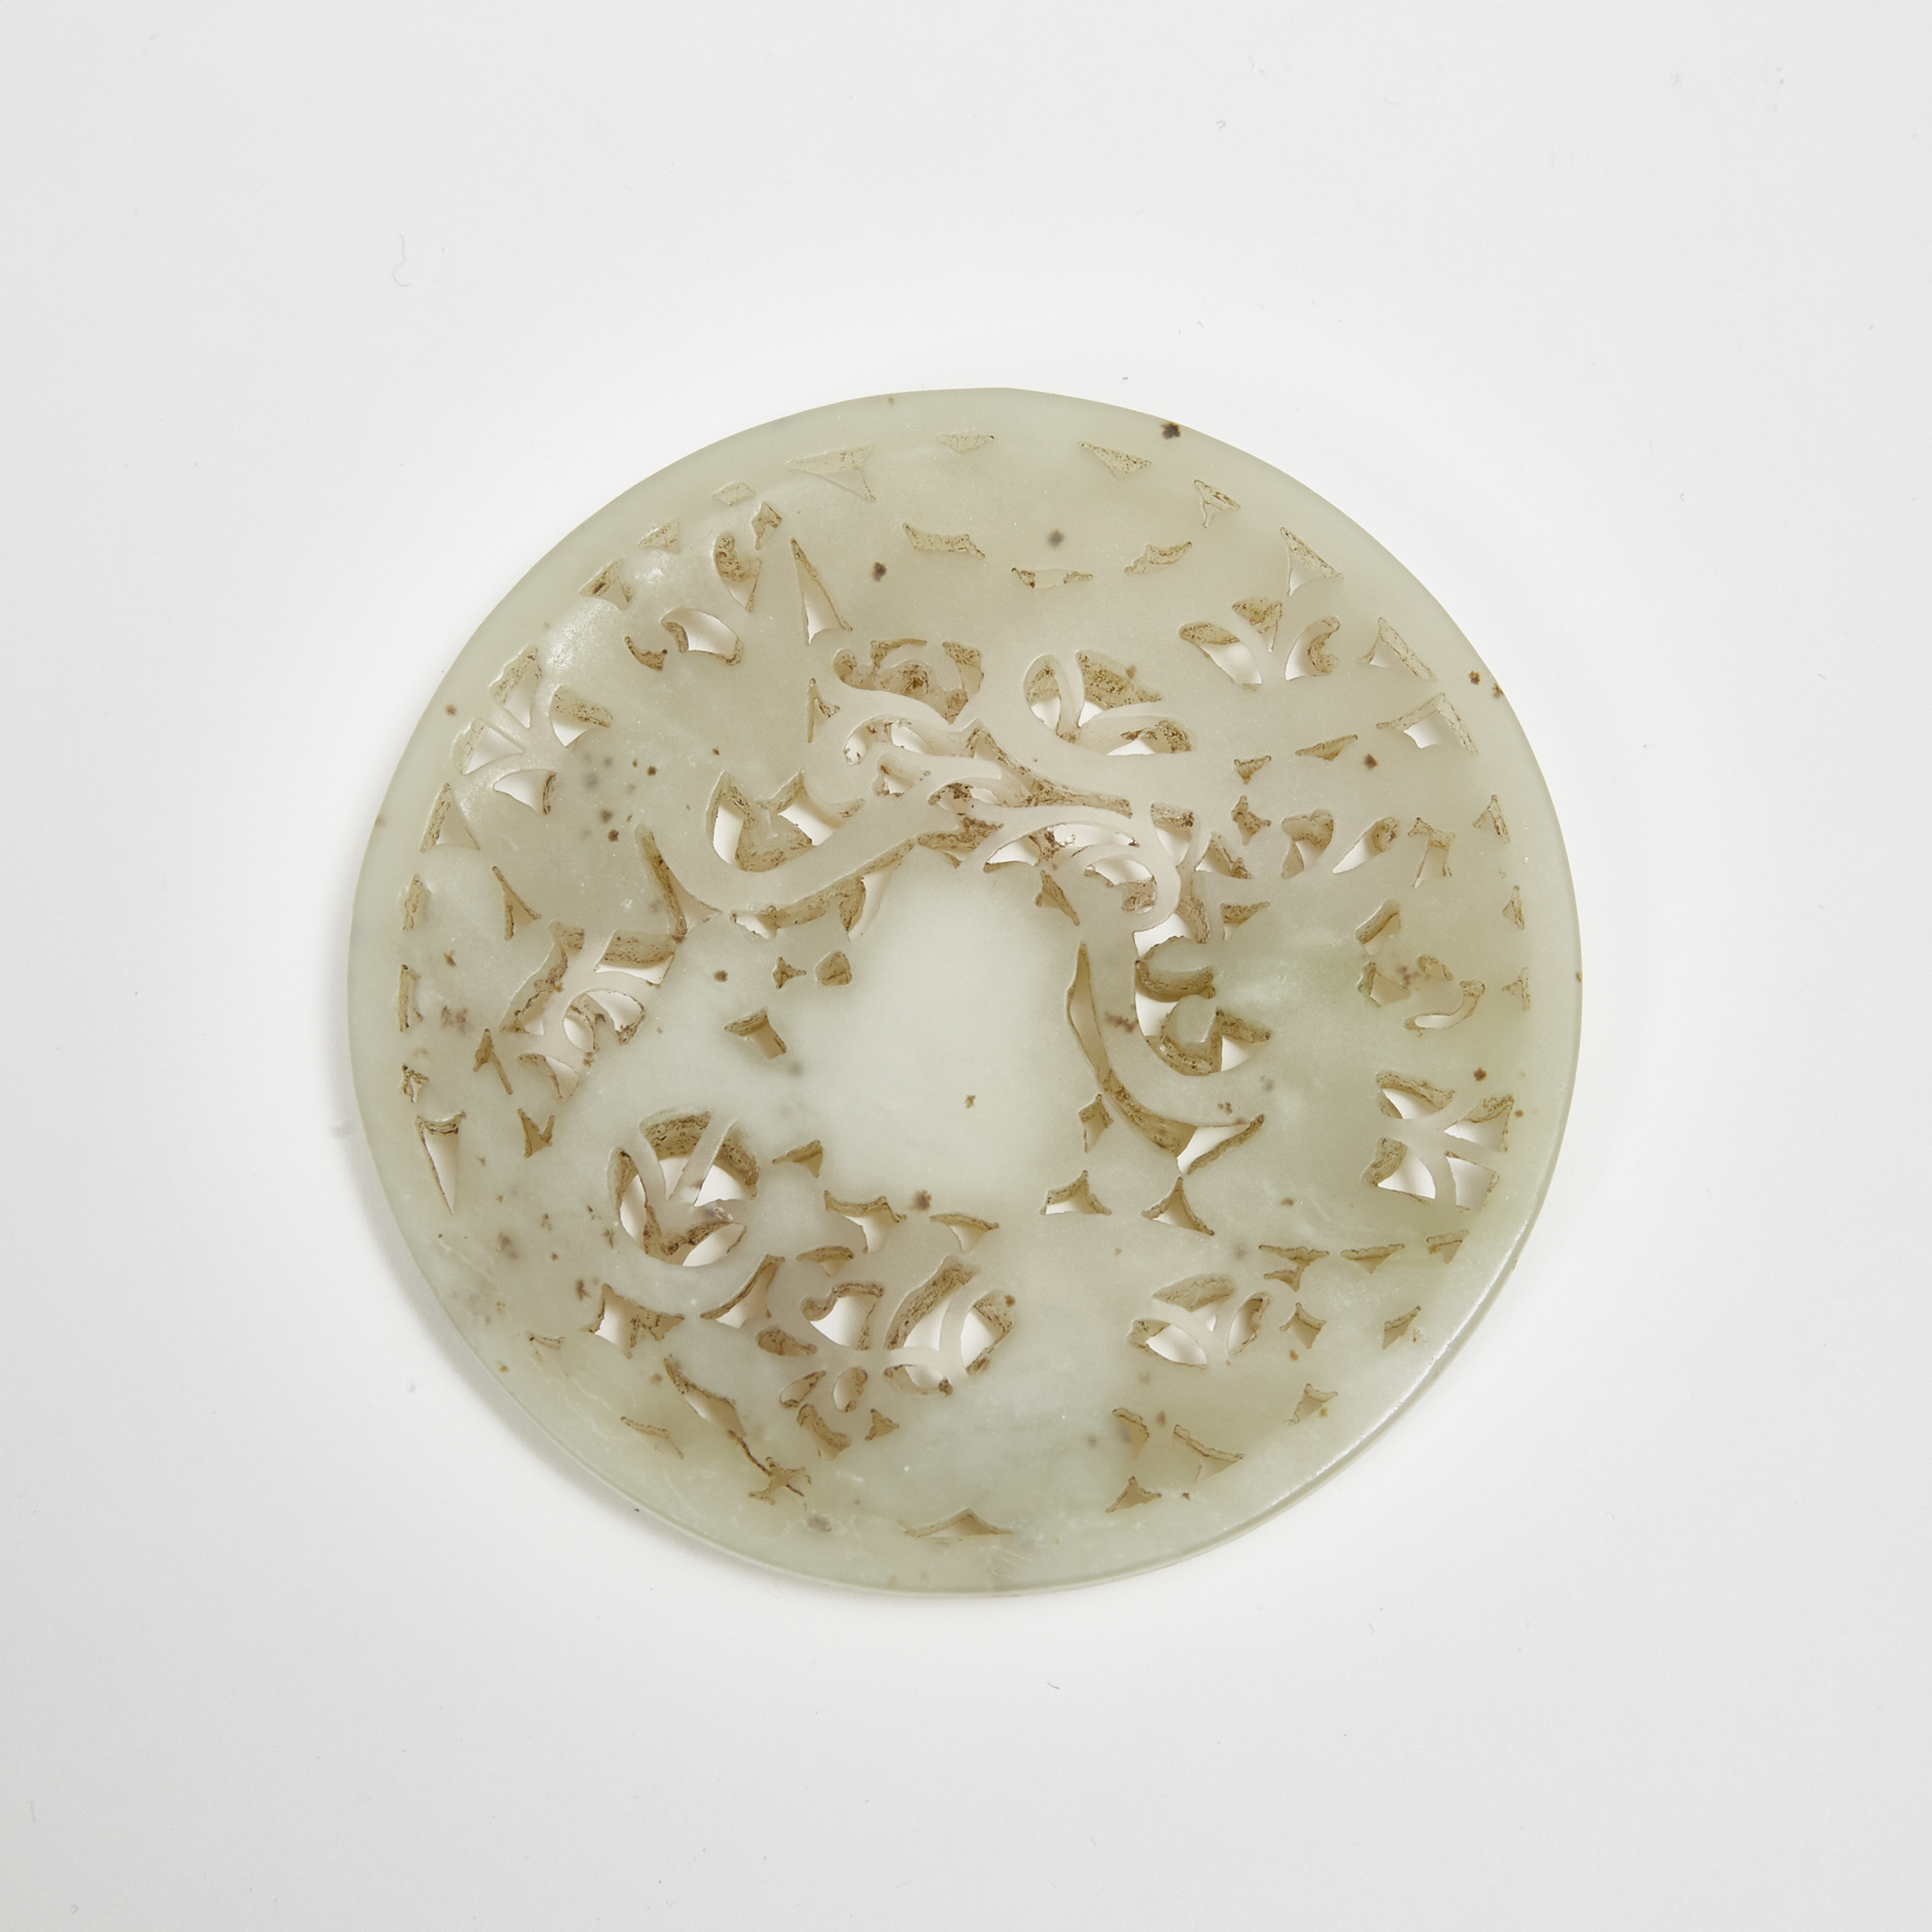 A Reticulated Celadon Jade Roundel with Cranes